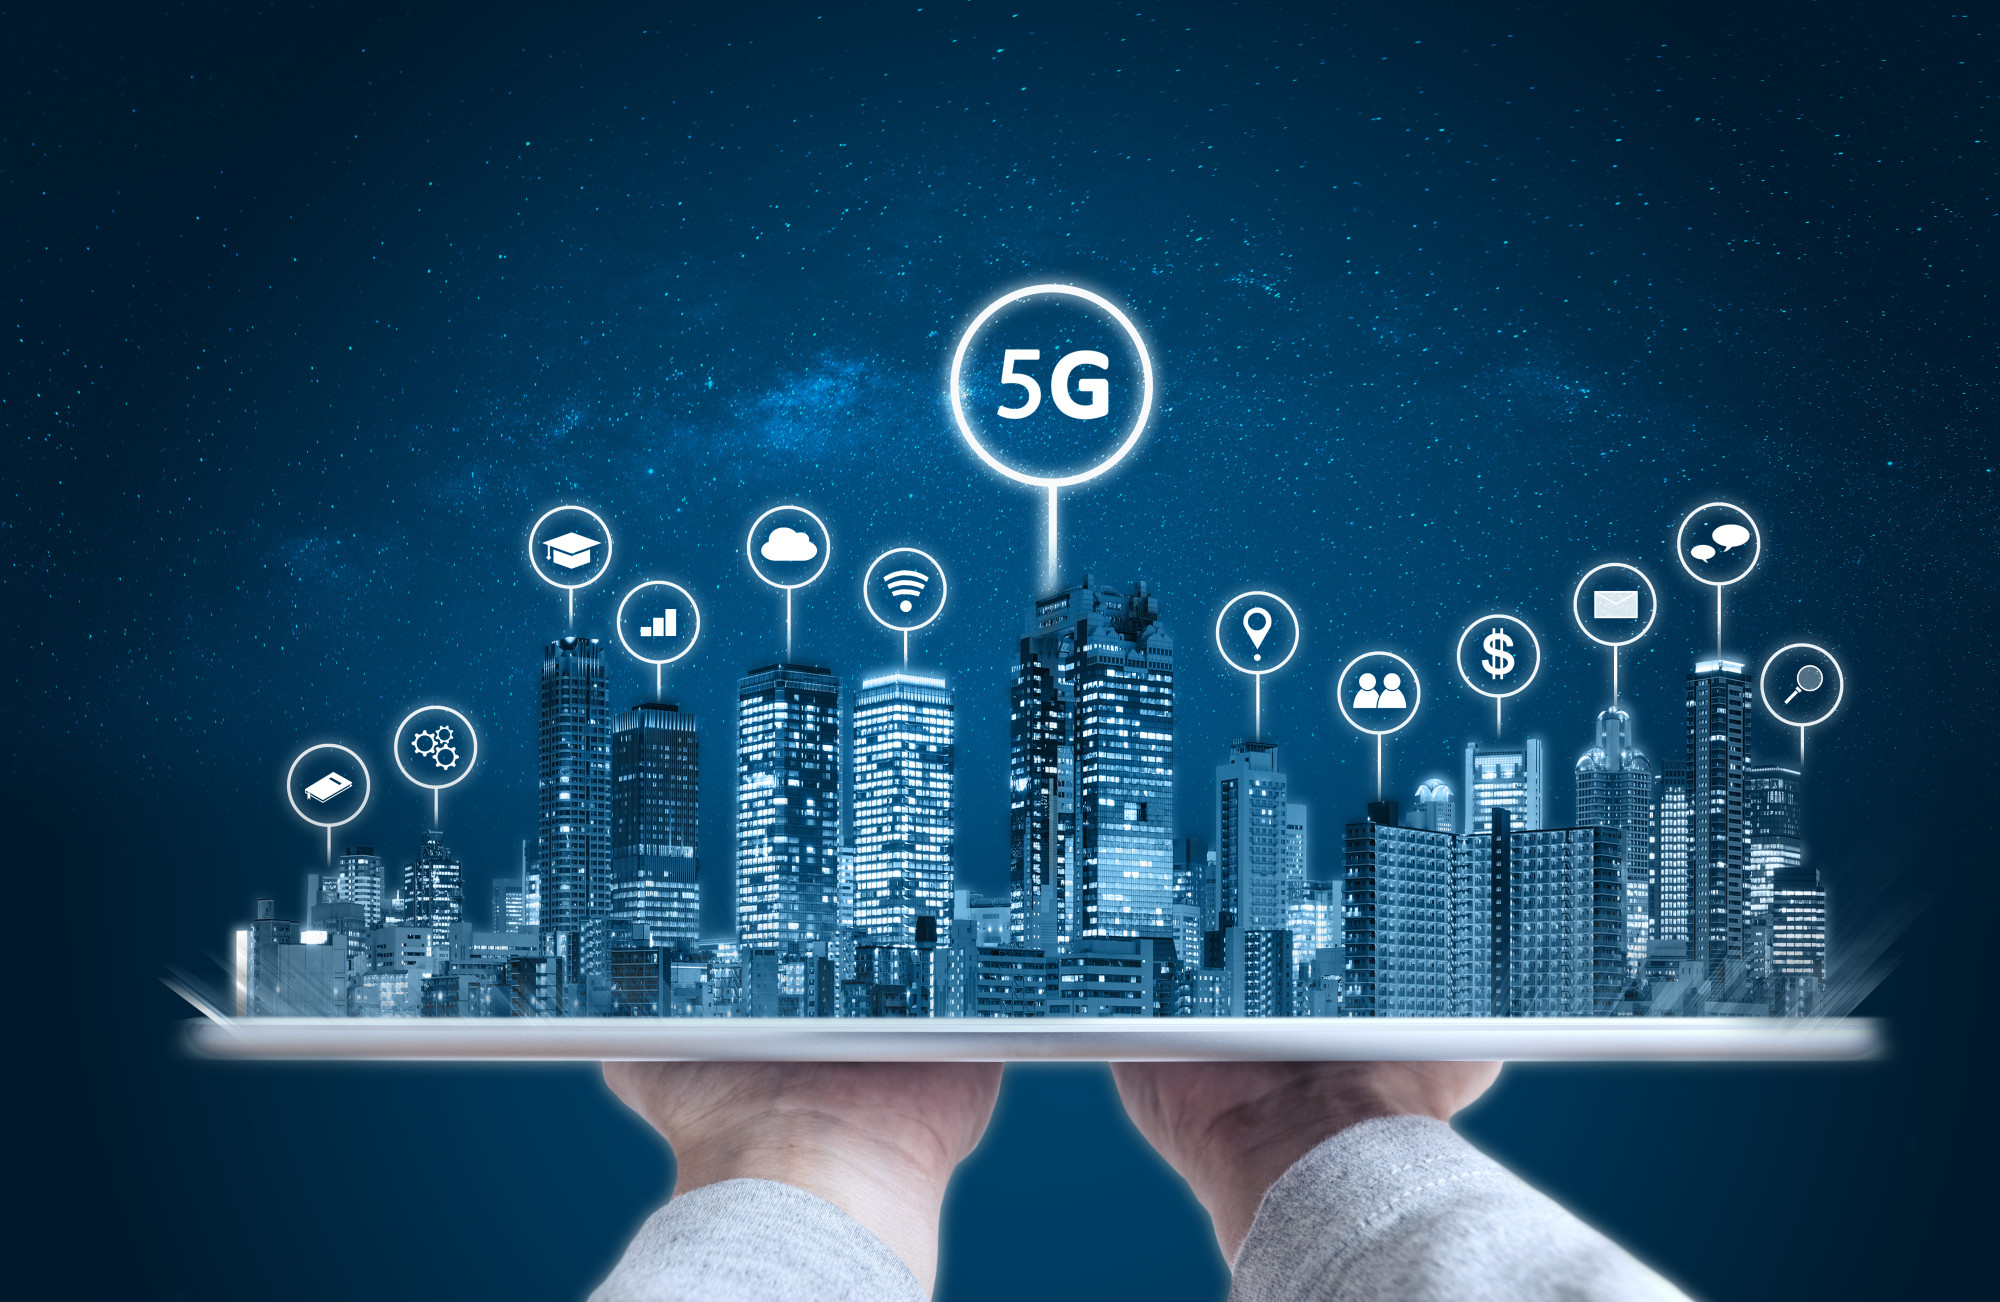 What Is 5G vs 4G? - FindABusinessThat.com